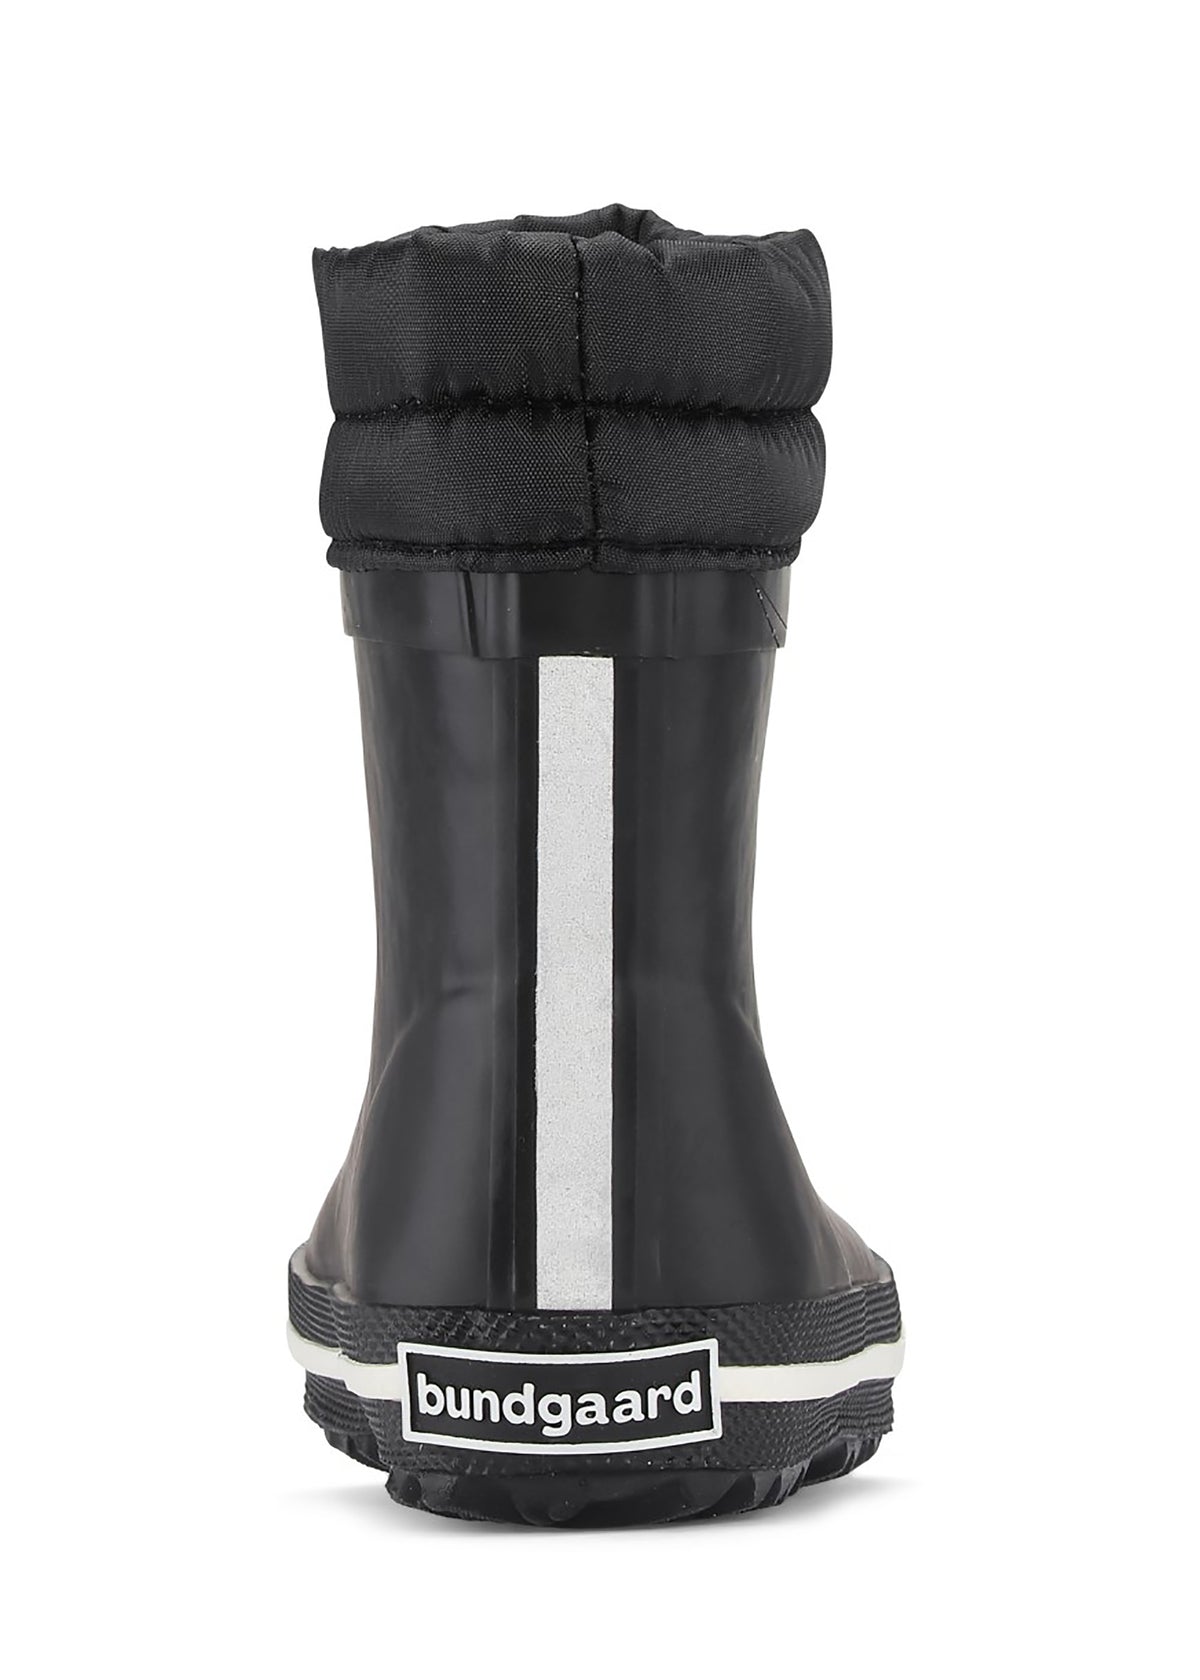 Rubber boots with a warm lining - black, short shaft, drawstrings, Cirro Low Warm